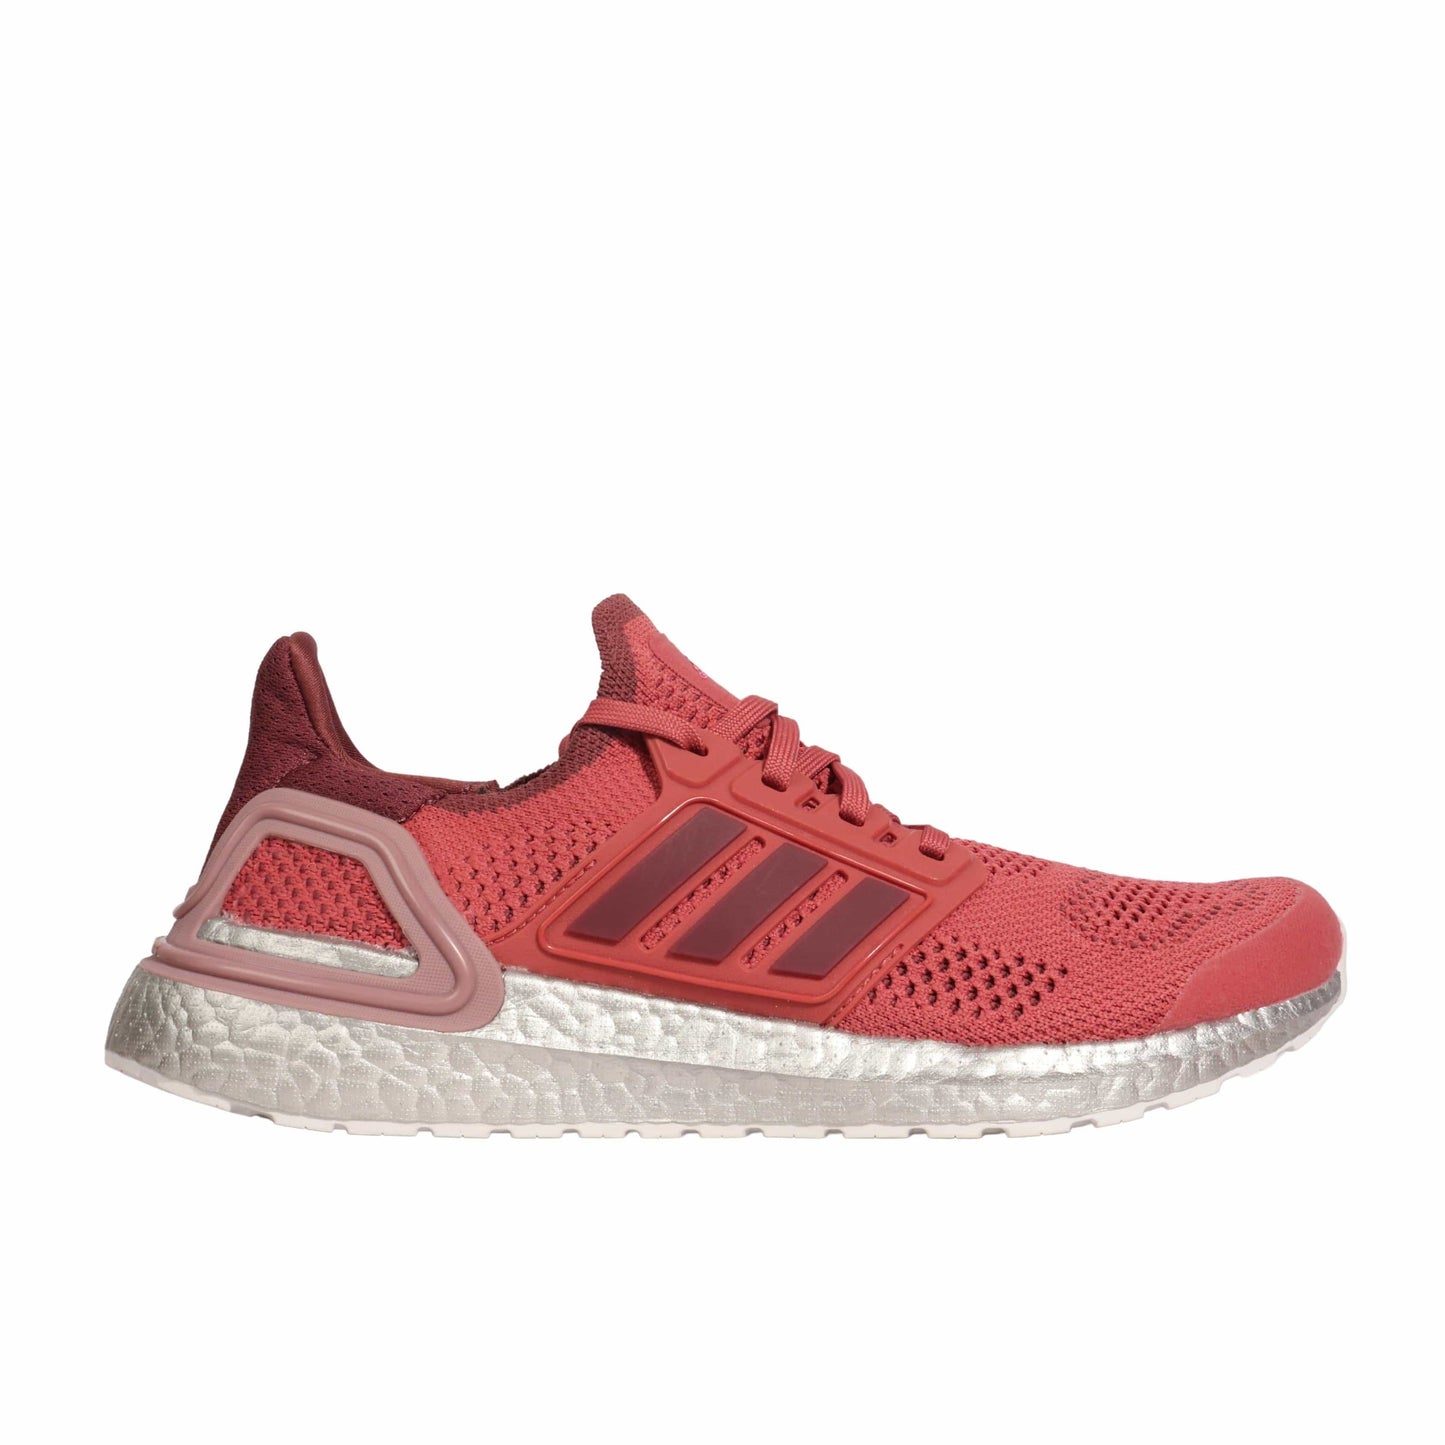 ADIDAS Athletic Shoes 40.5 / Pink ADIDAS - Ultra boost 19.5 DNA Sneakers